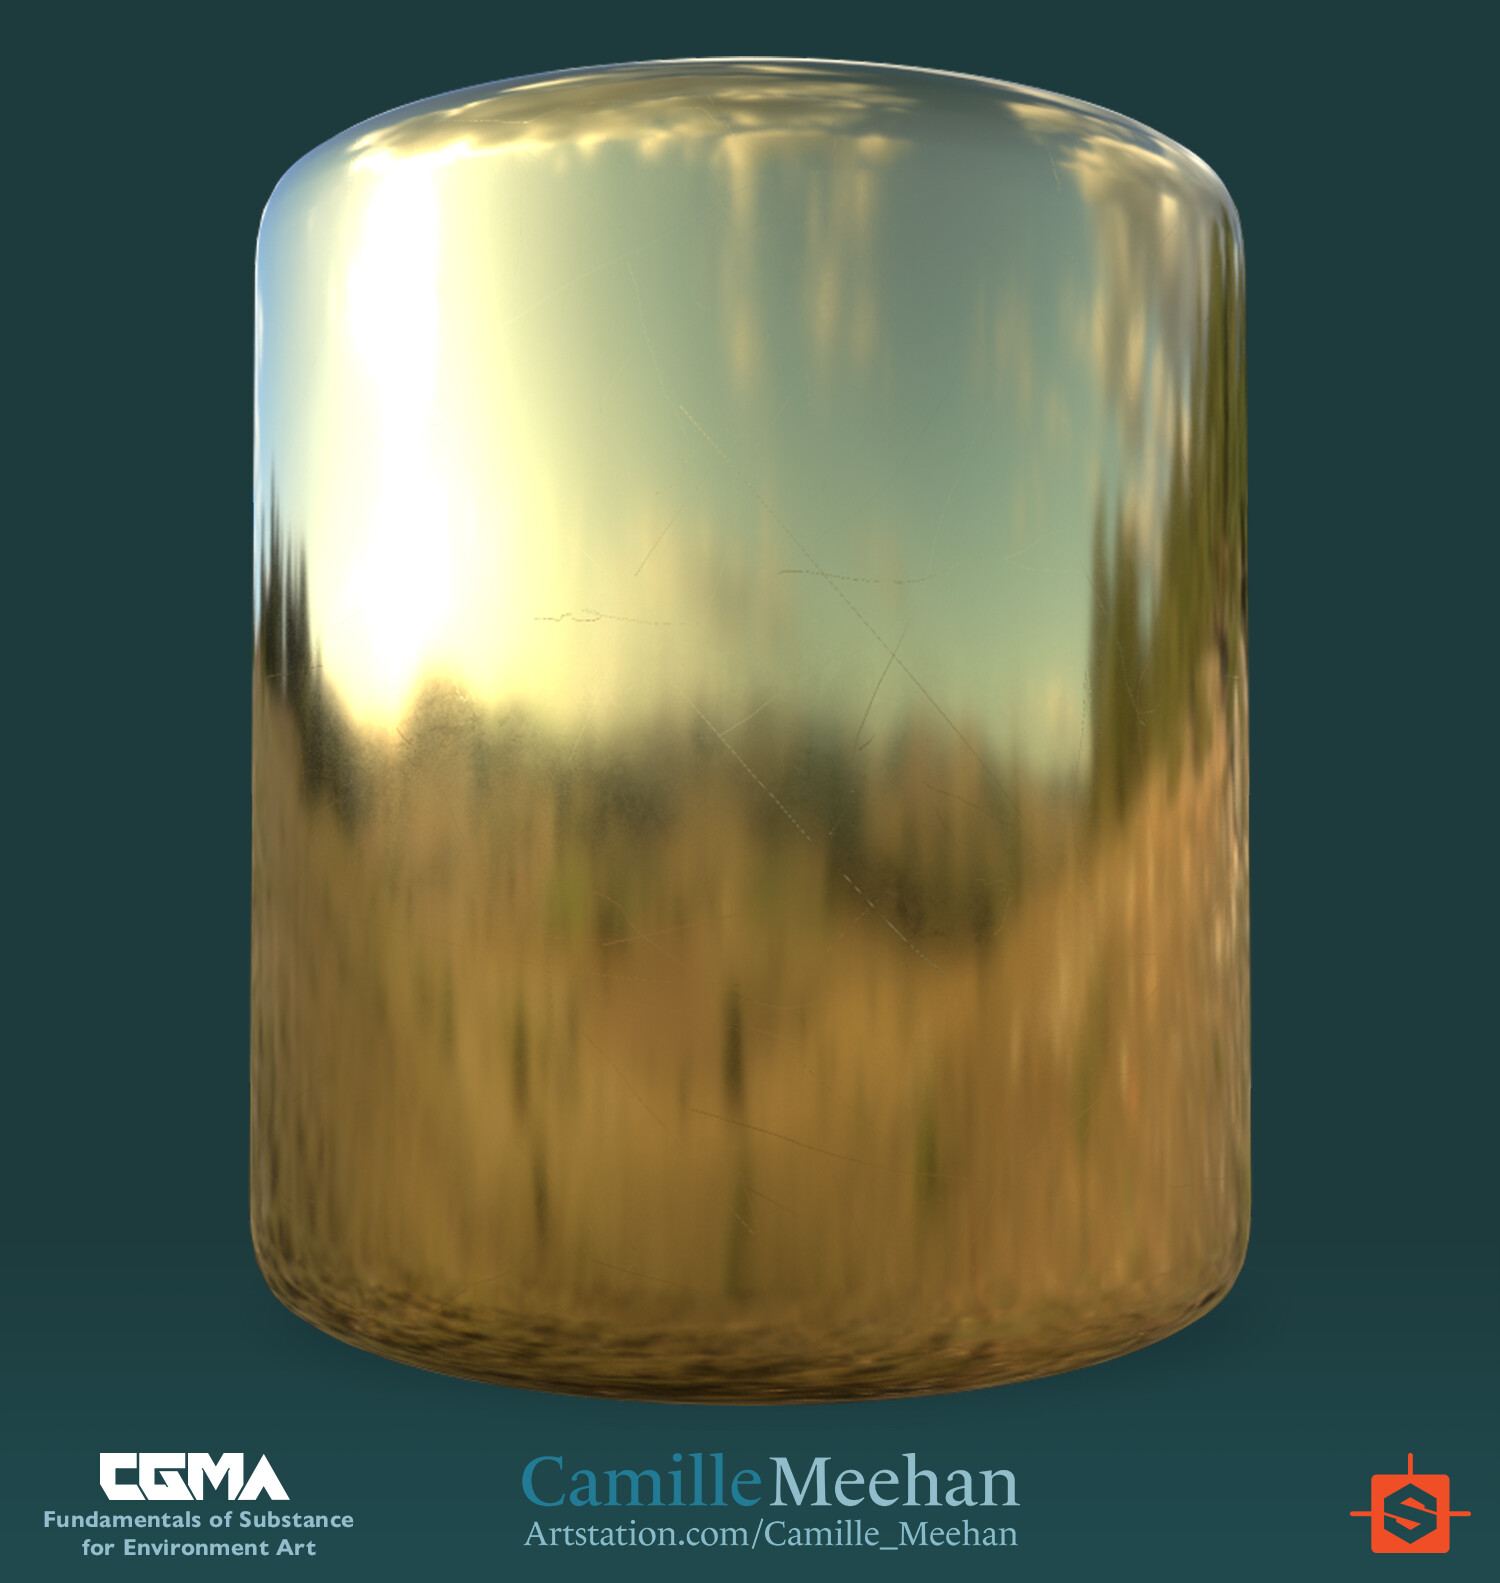 This is a polished brass material and it may need adjustments. It uses the PBR value range that I found but when rendered it looks very gold so I may need to so some adjusting once I get it into Unreal. I do like a bright brass though.